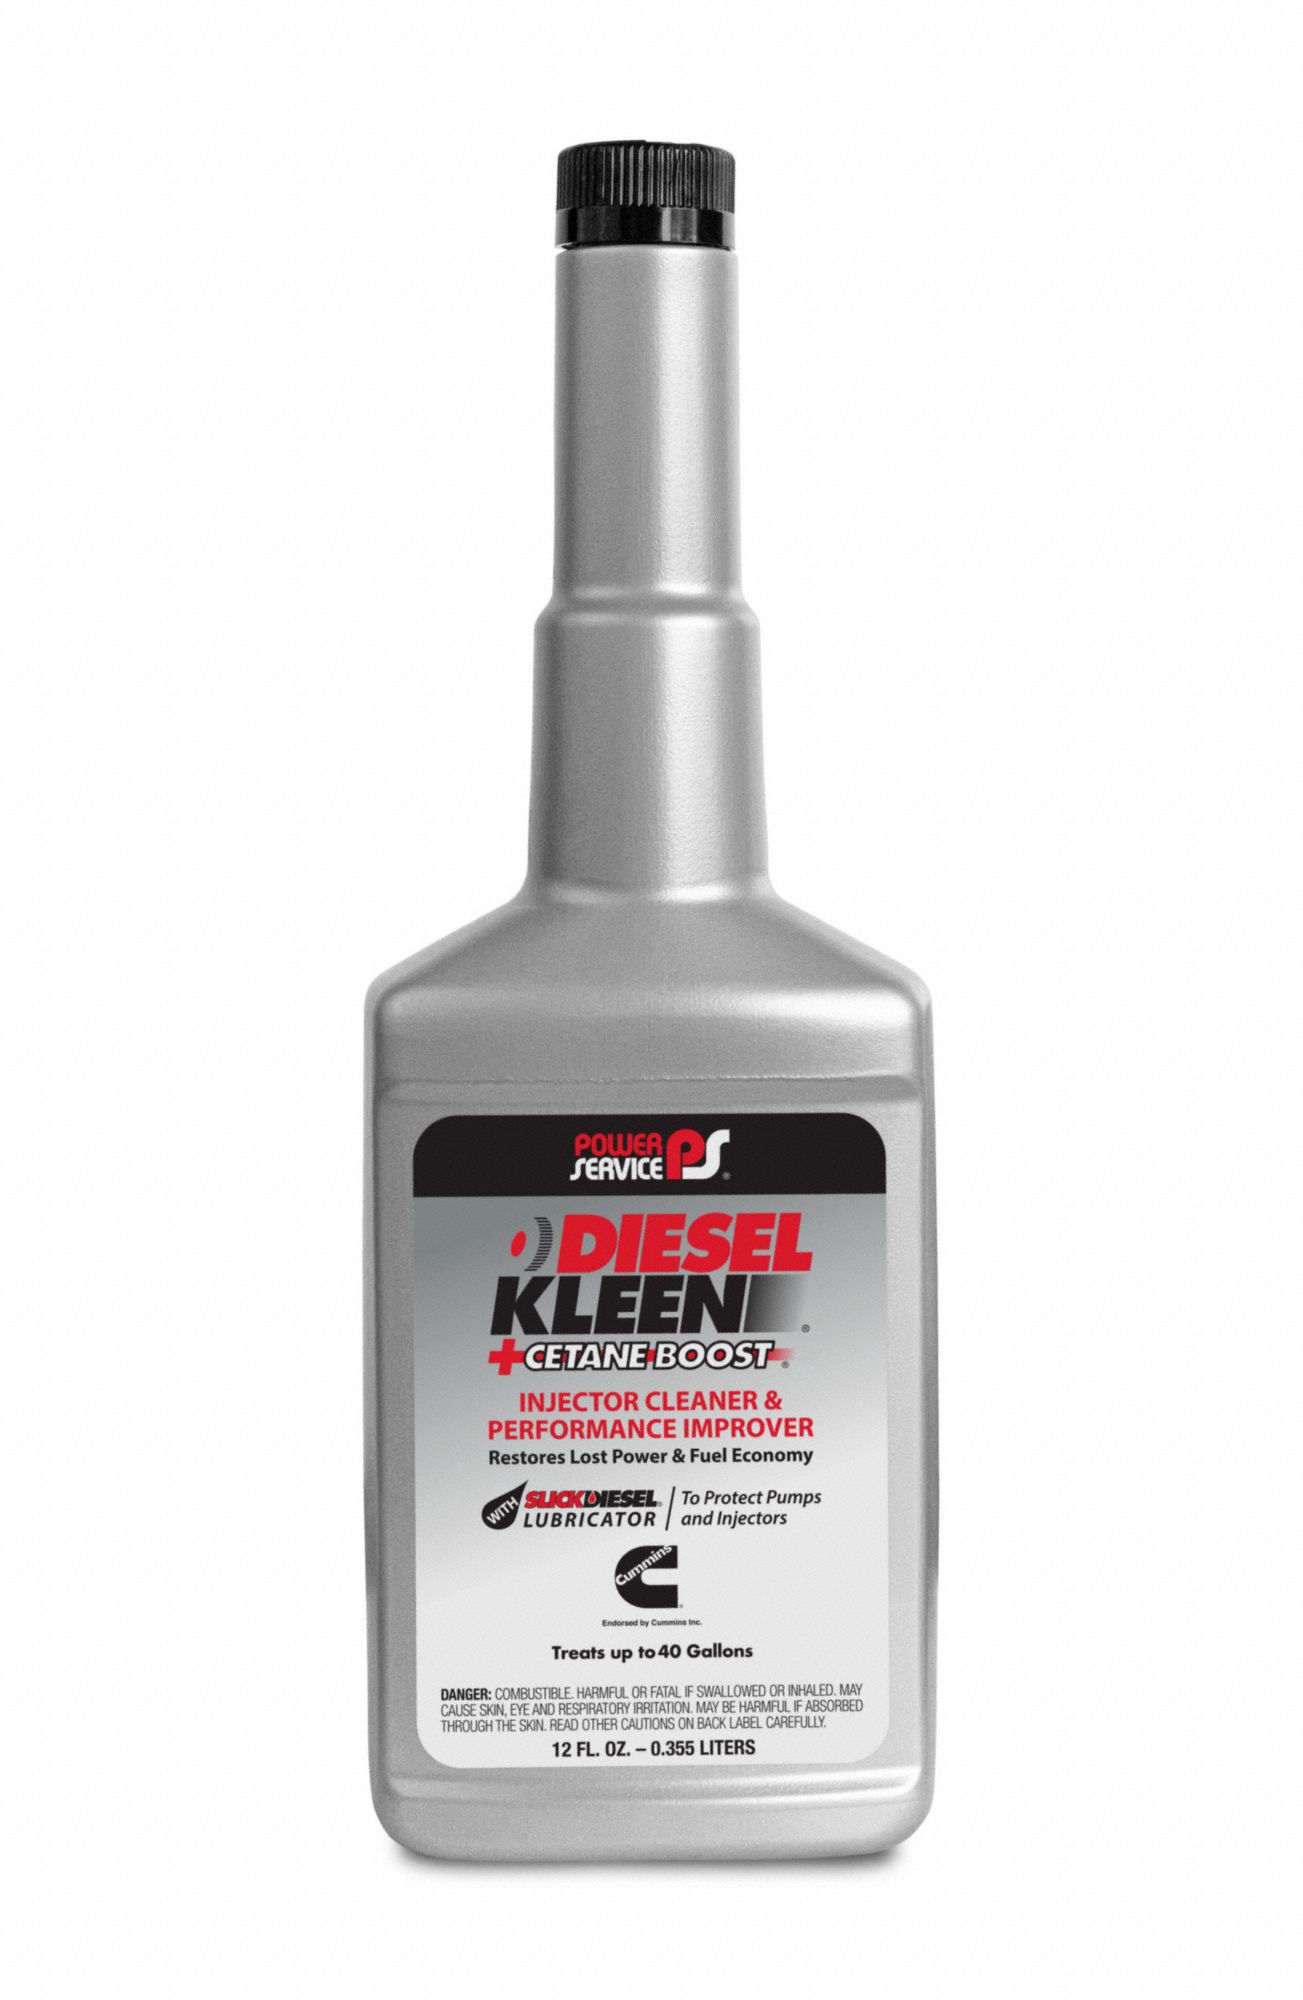 Diesel System Cleaner and Cetane Booster: Fuel Additives and Stabilizers